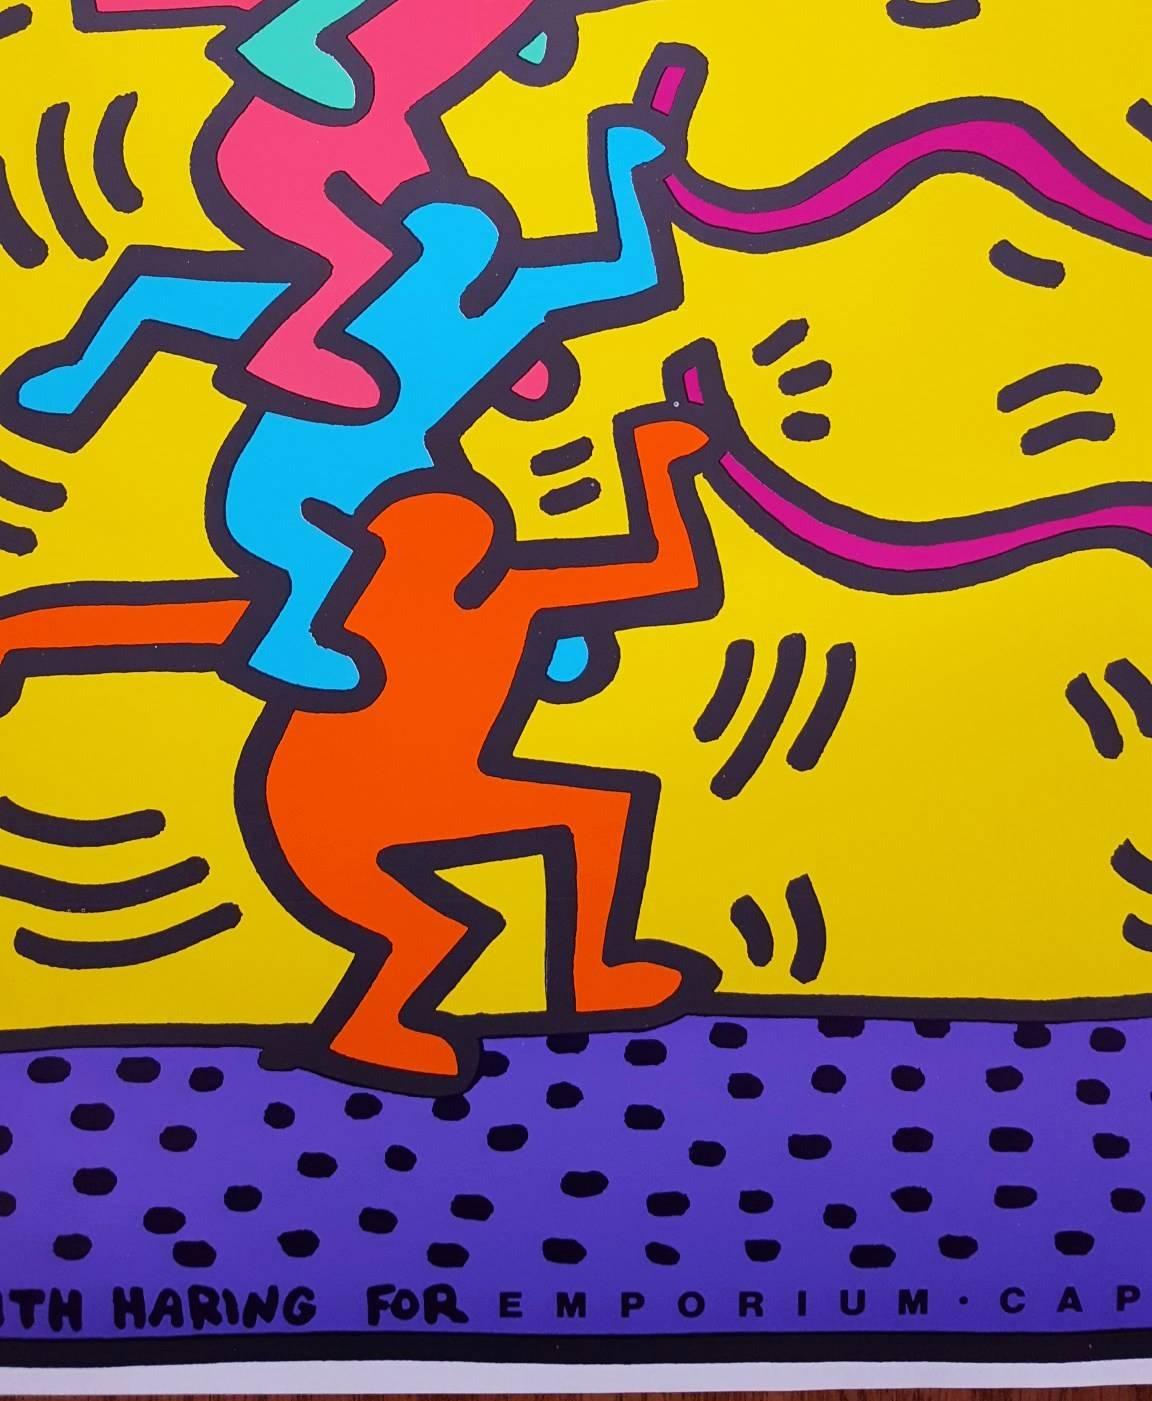 An original offset-lithograph exhibition poster by American artist Keith Haring (1958-1990) titled 